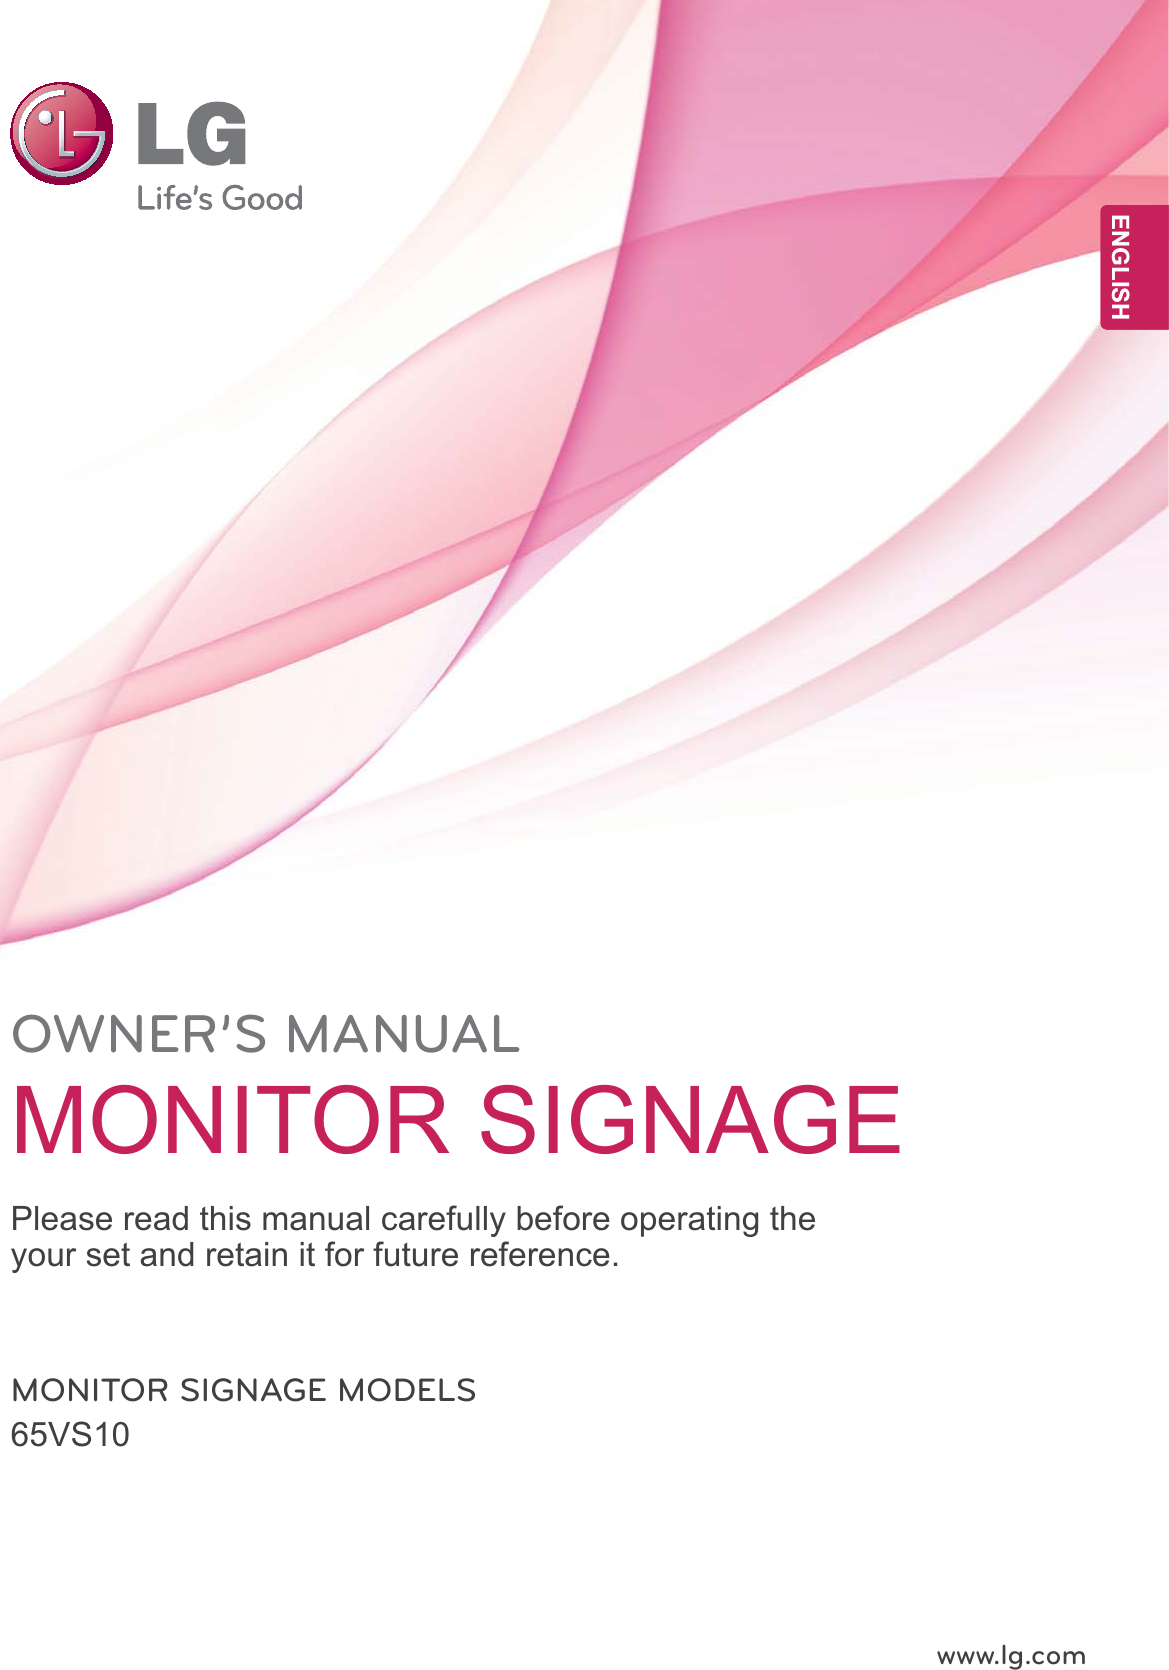 www.lg.comOWNER’S MANUALMONITOR SIGNAGE 65VS10Please read this manual carefully before operating the your set and retain it for future reference.MONITOR SIGNAGE MODELSENGENGLISH